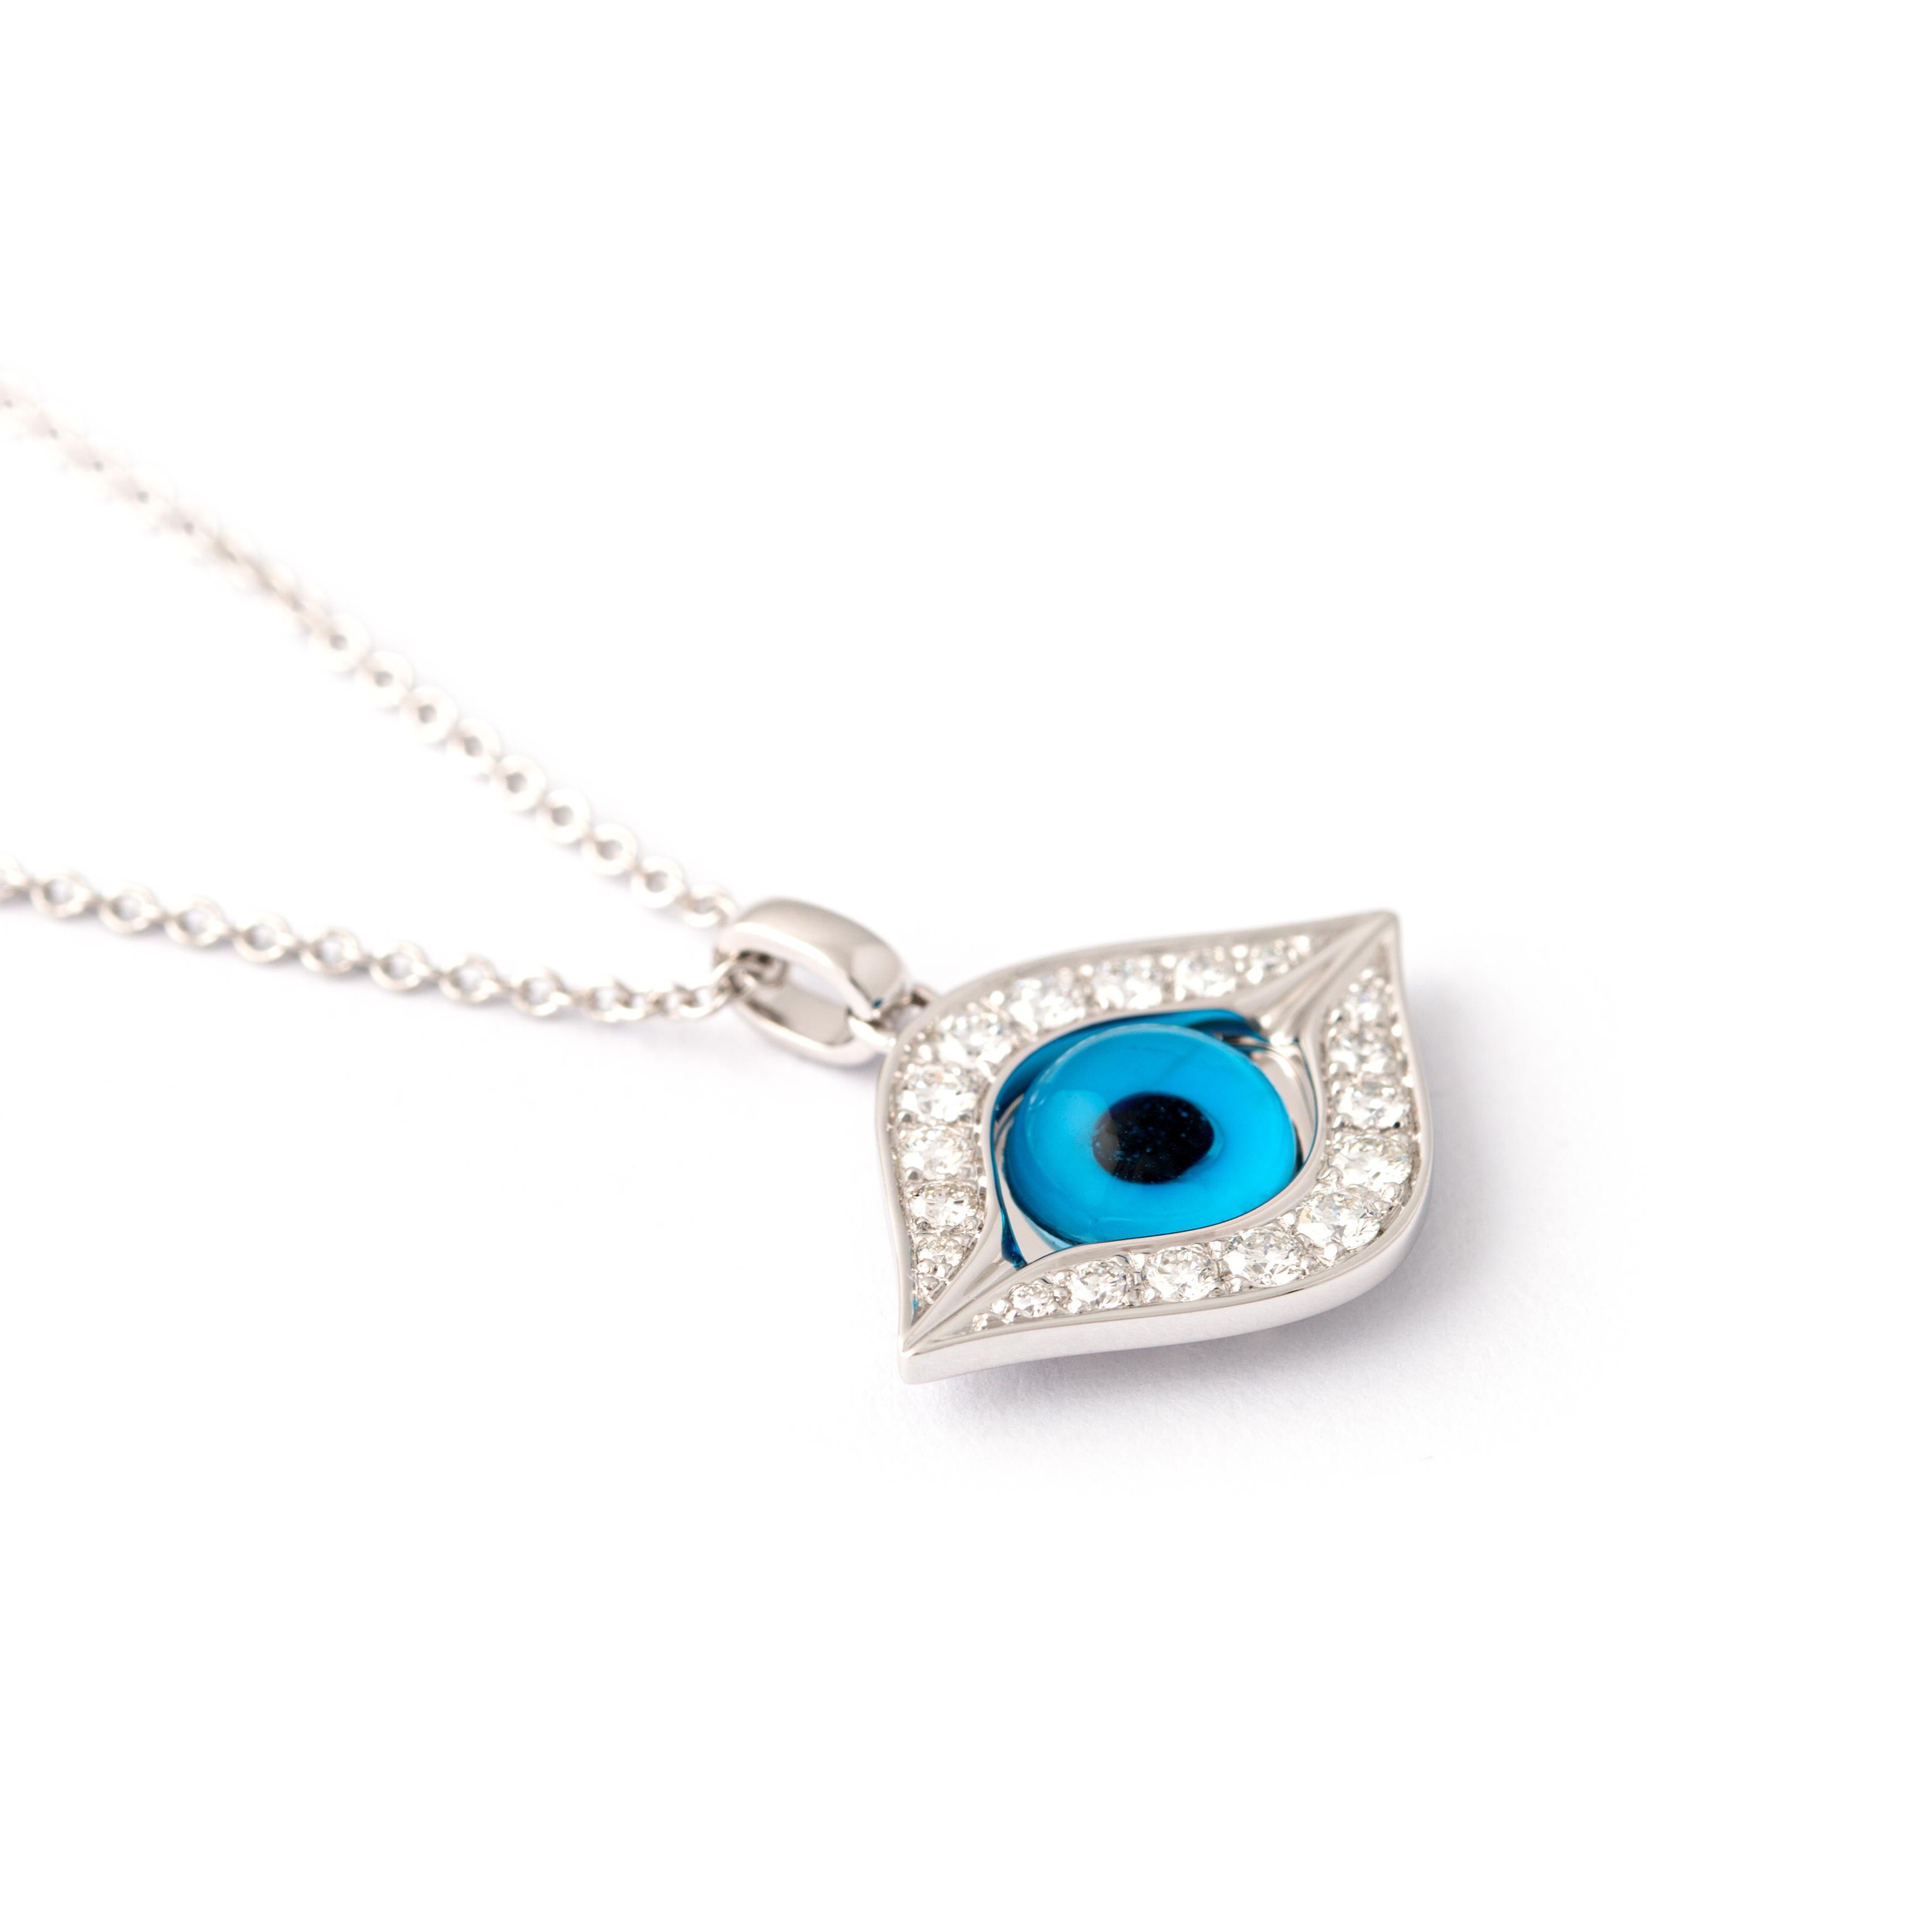 Eye pendant necklace in 18kt white gold set with 18 diamonds 0.40 cts.

Length: 41.50 centimeters ( 16.34 inches) up to 44.50 centimeters (17.52 inches).

Pendant length : 2.00 centimeters ( 0.79 inches) .

Total weight: 5.17 grams. 